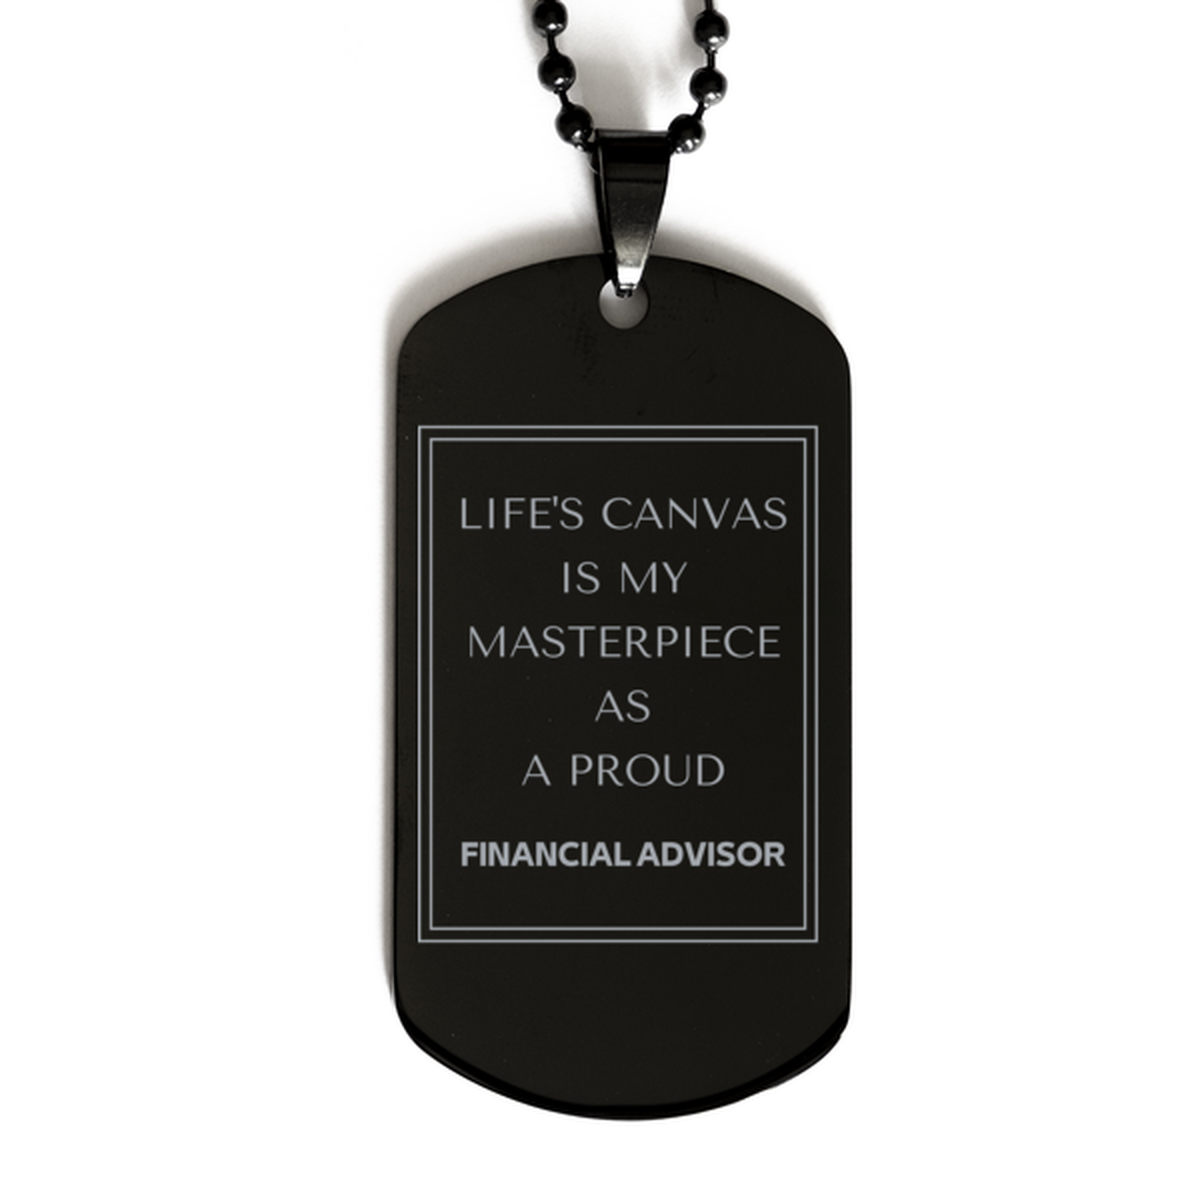 Proud Financial Advisor Gifts, Life's canvas is my masterpiece, Epic Birthday Christmas Unique Black Dog Tag For Financial Advisor, Coworkers, Men, Women, Friends